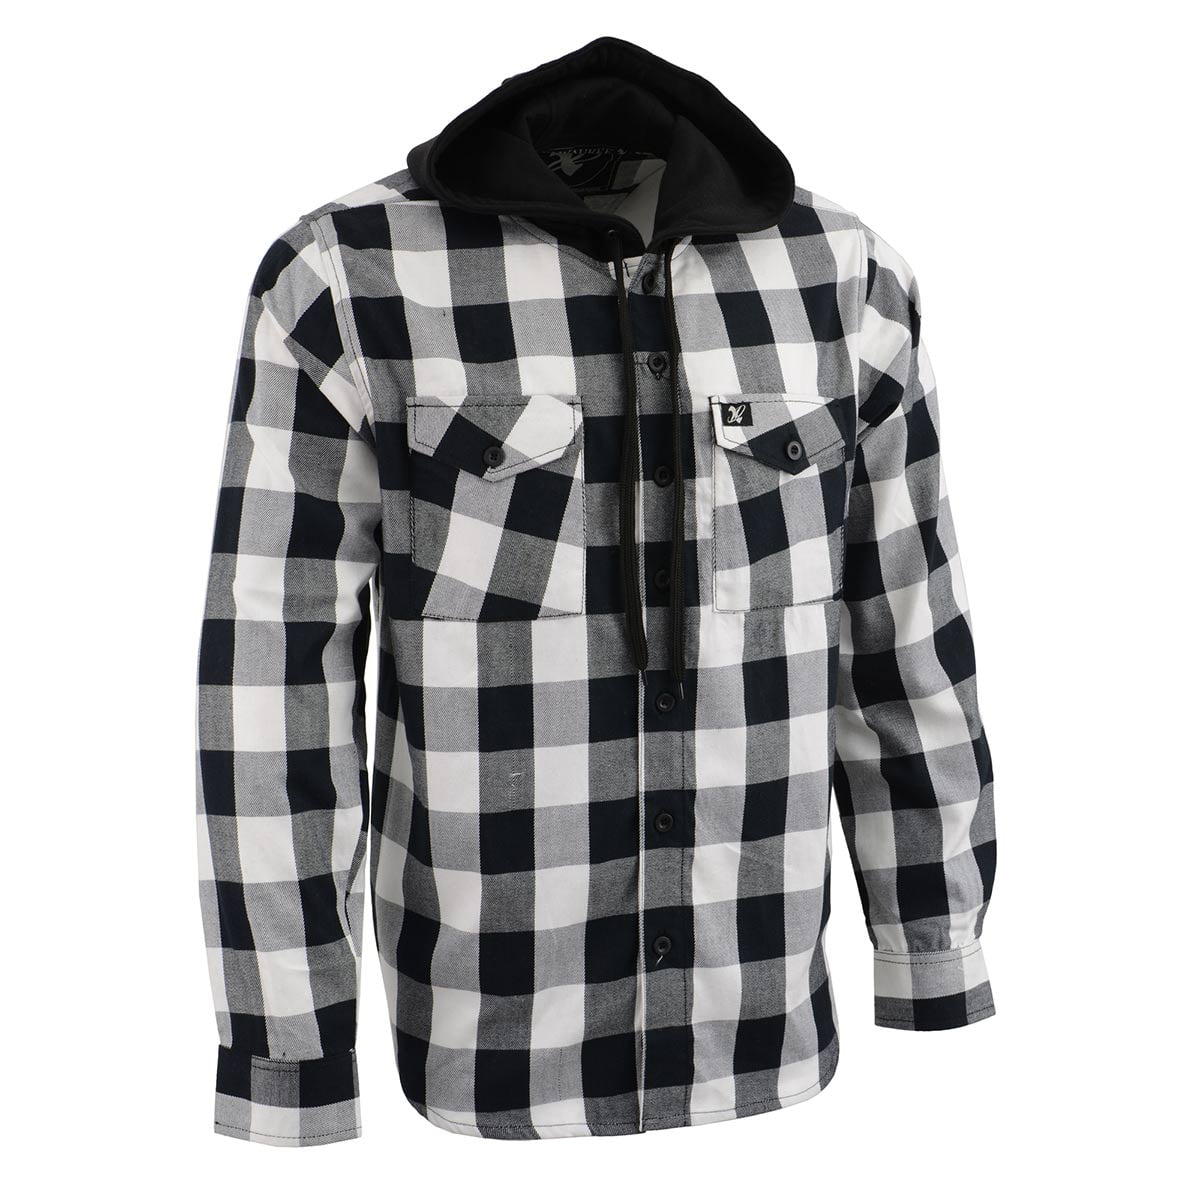 Milwaukee Leather Men's Flannel Plaid Shirt Black and White Long